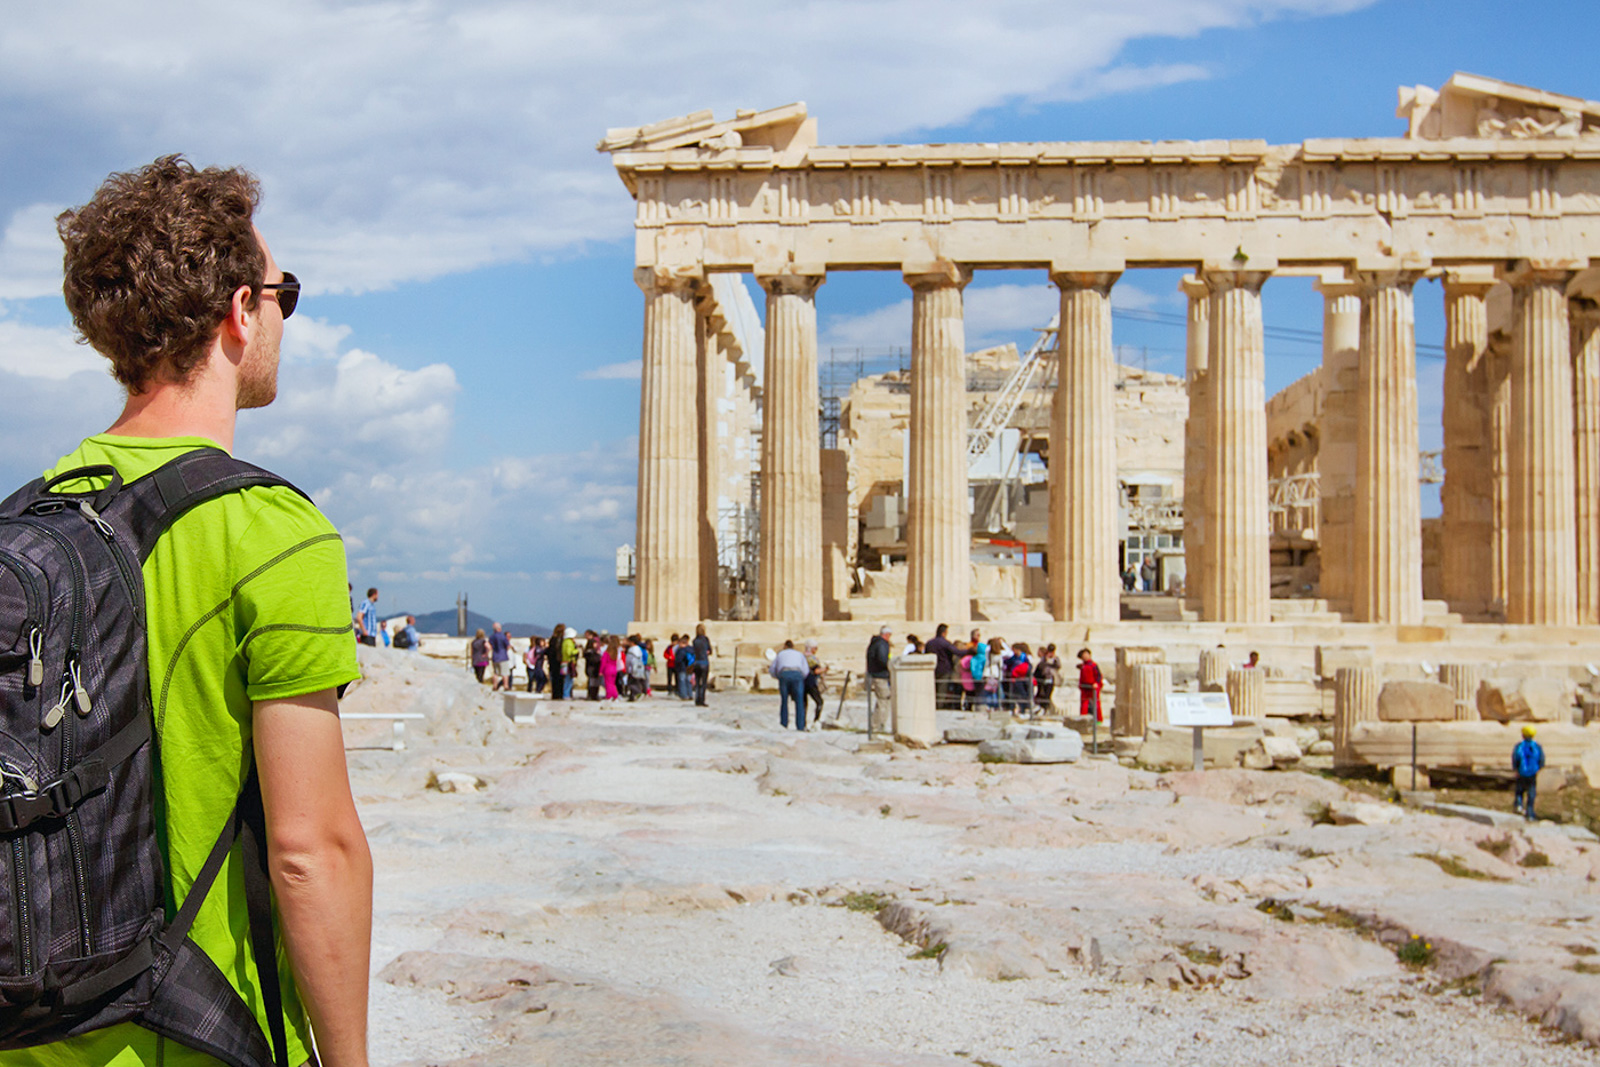 Man with a backpack and sunglasses looks out at the Acropolis in Athens, Greece